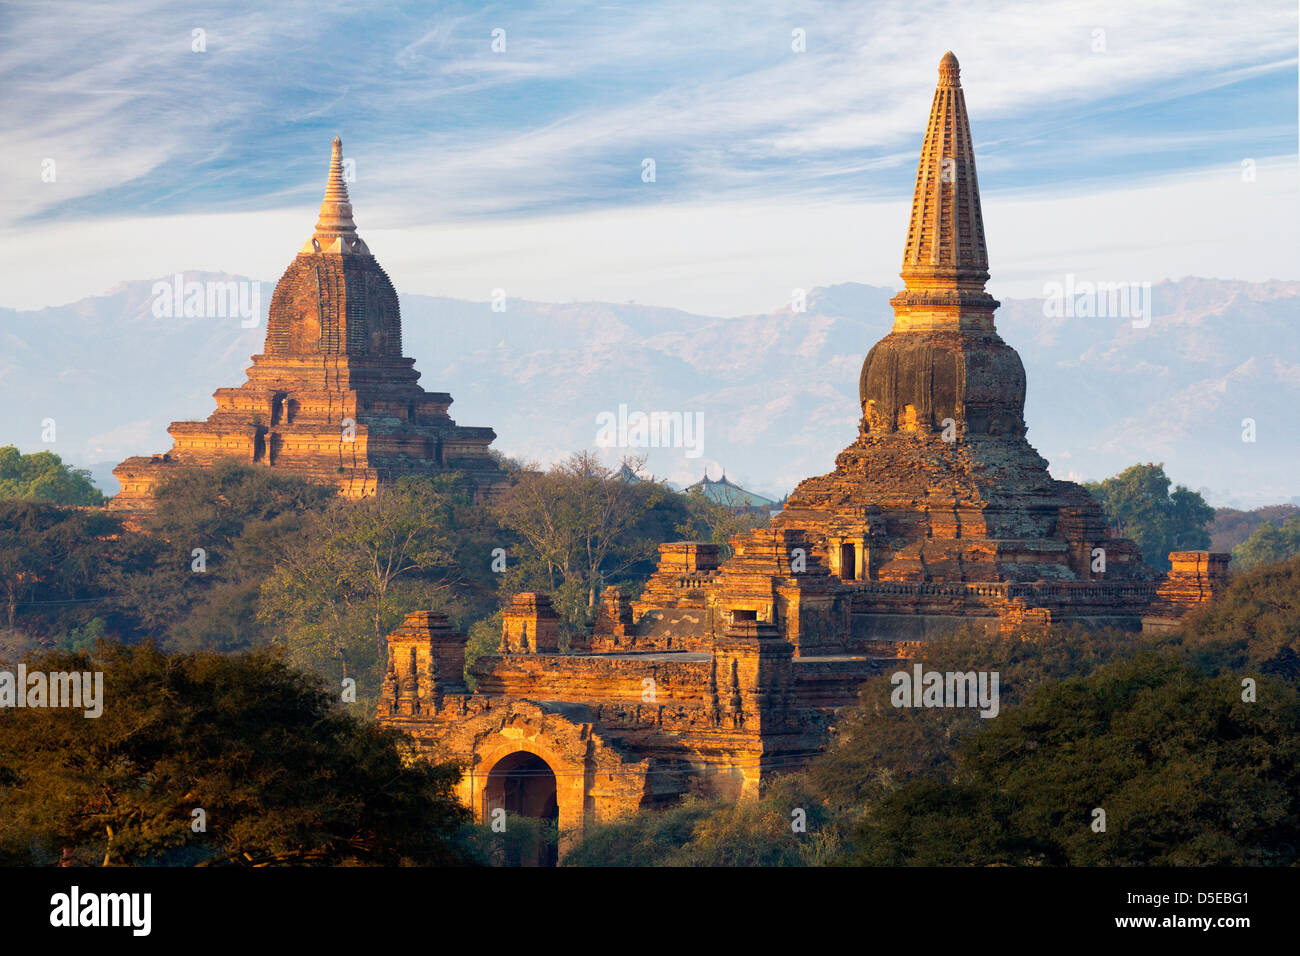 The Temples and Pagodas of Bagan, Myanmar - early morning 6 Stock Photo